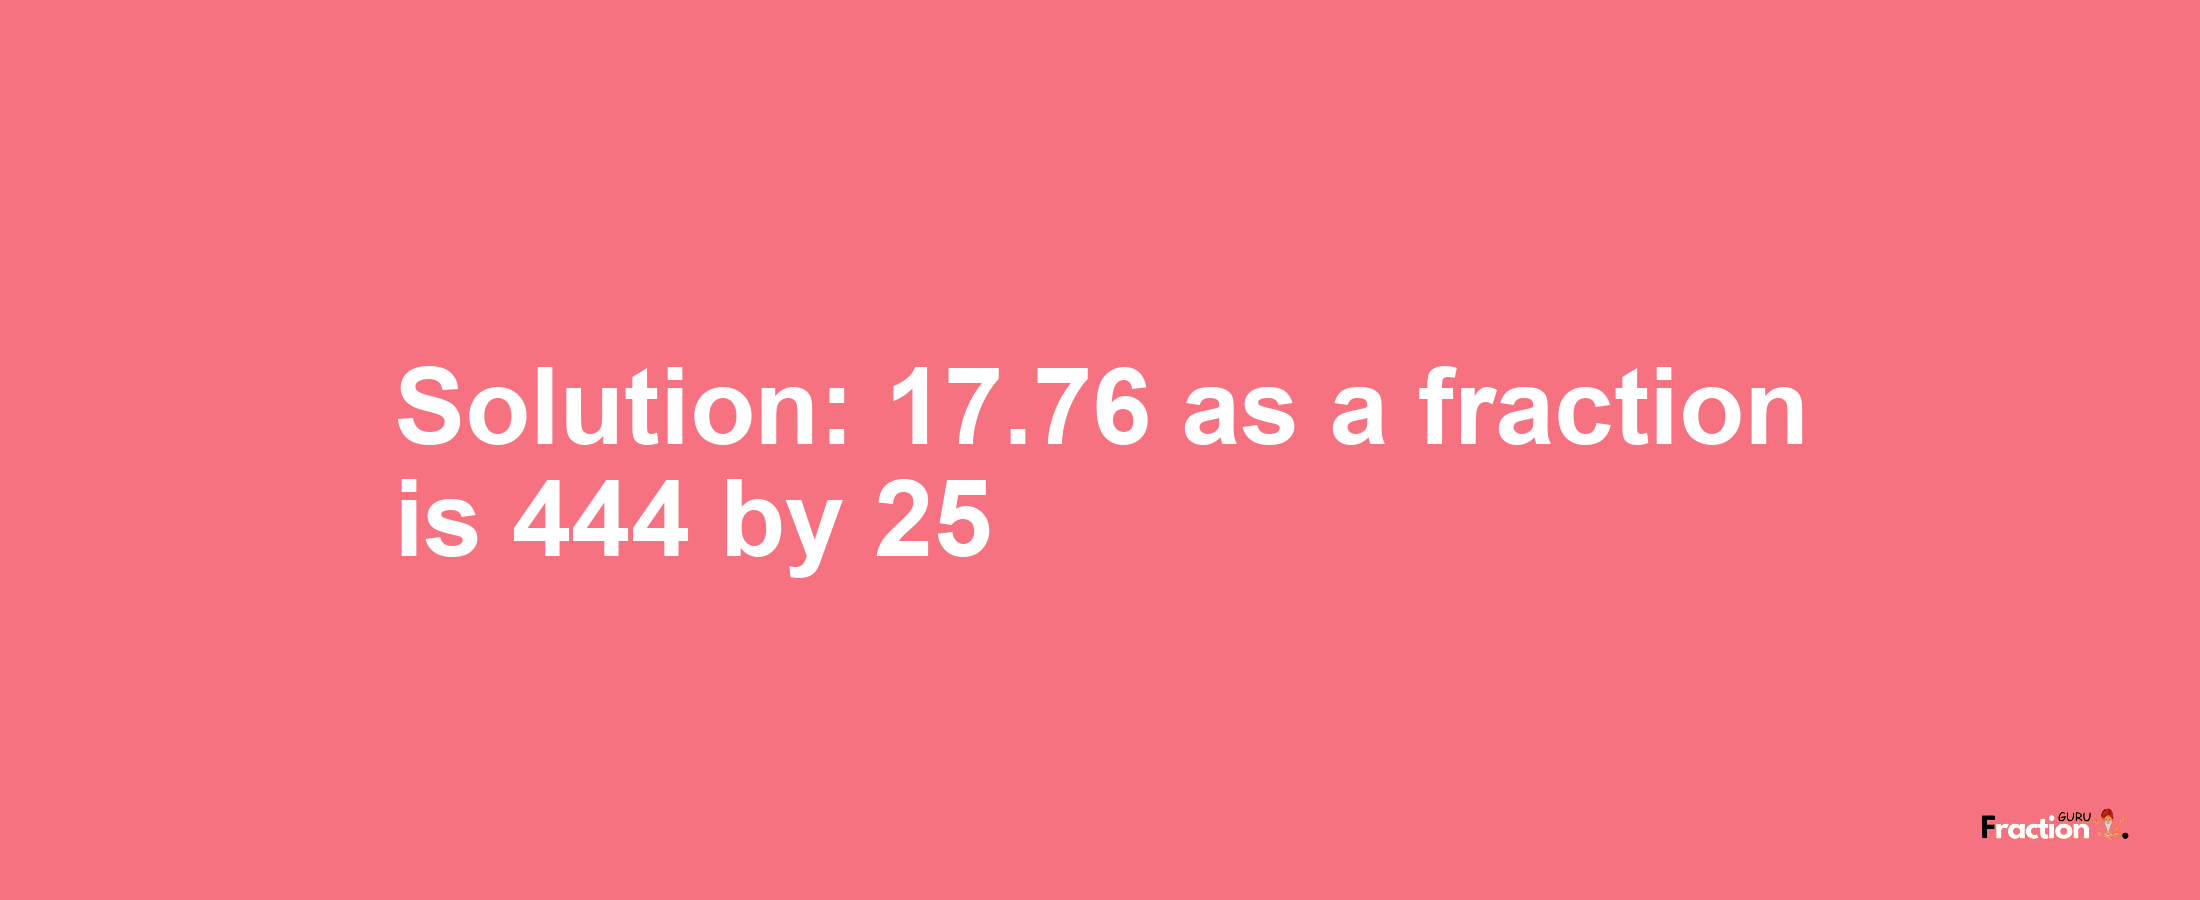 Solution:17.76 as a fraction is 444/25